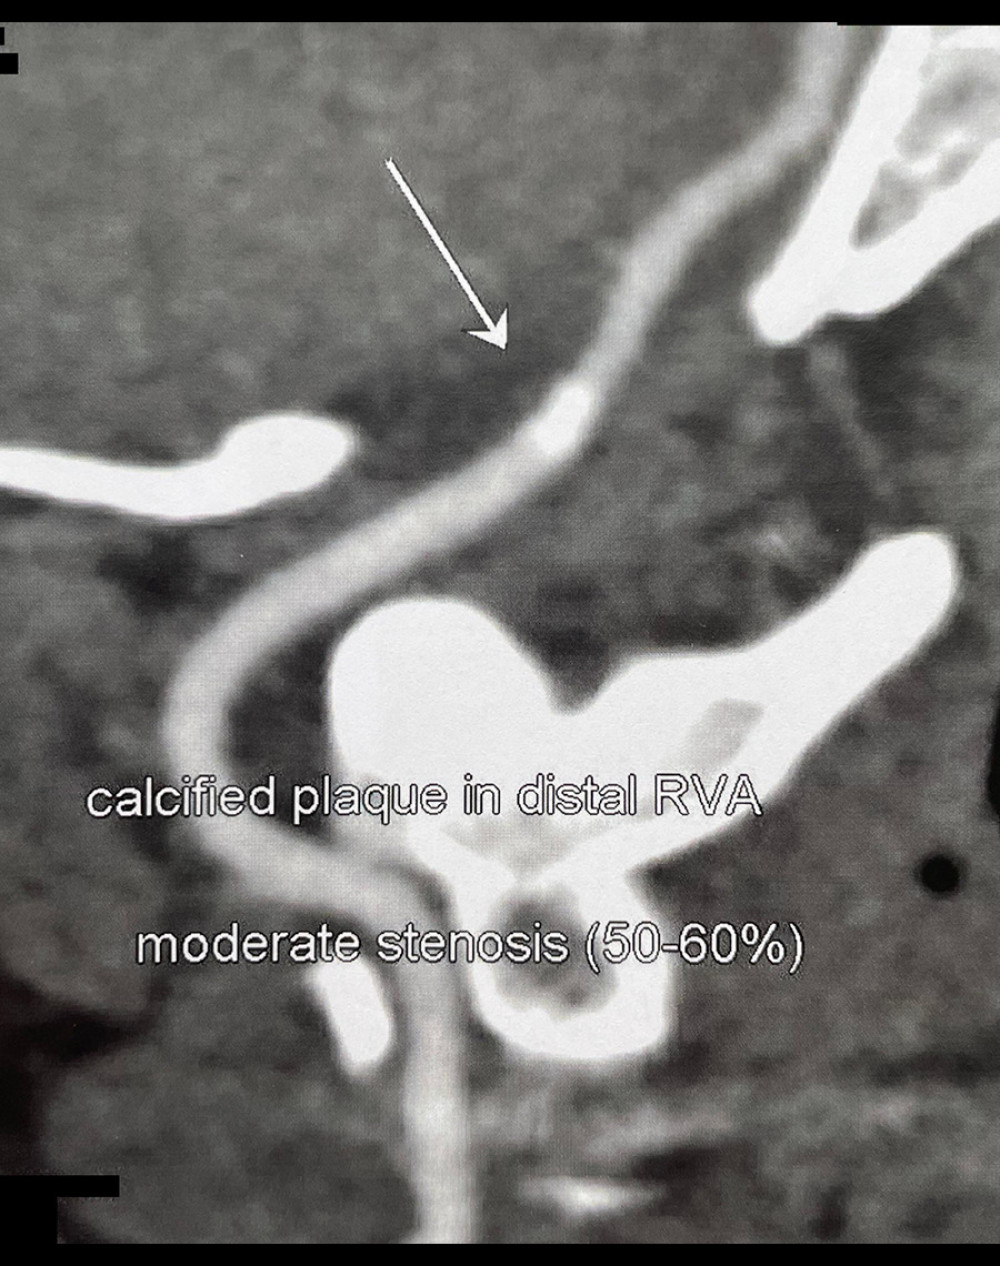 Oblique computed tomography angiogram of the head showing calcified plaque of the right vertebral artery (RVA) at the transition between the V3 and V4 segment of the RVA (arrow).